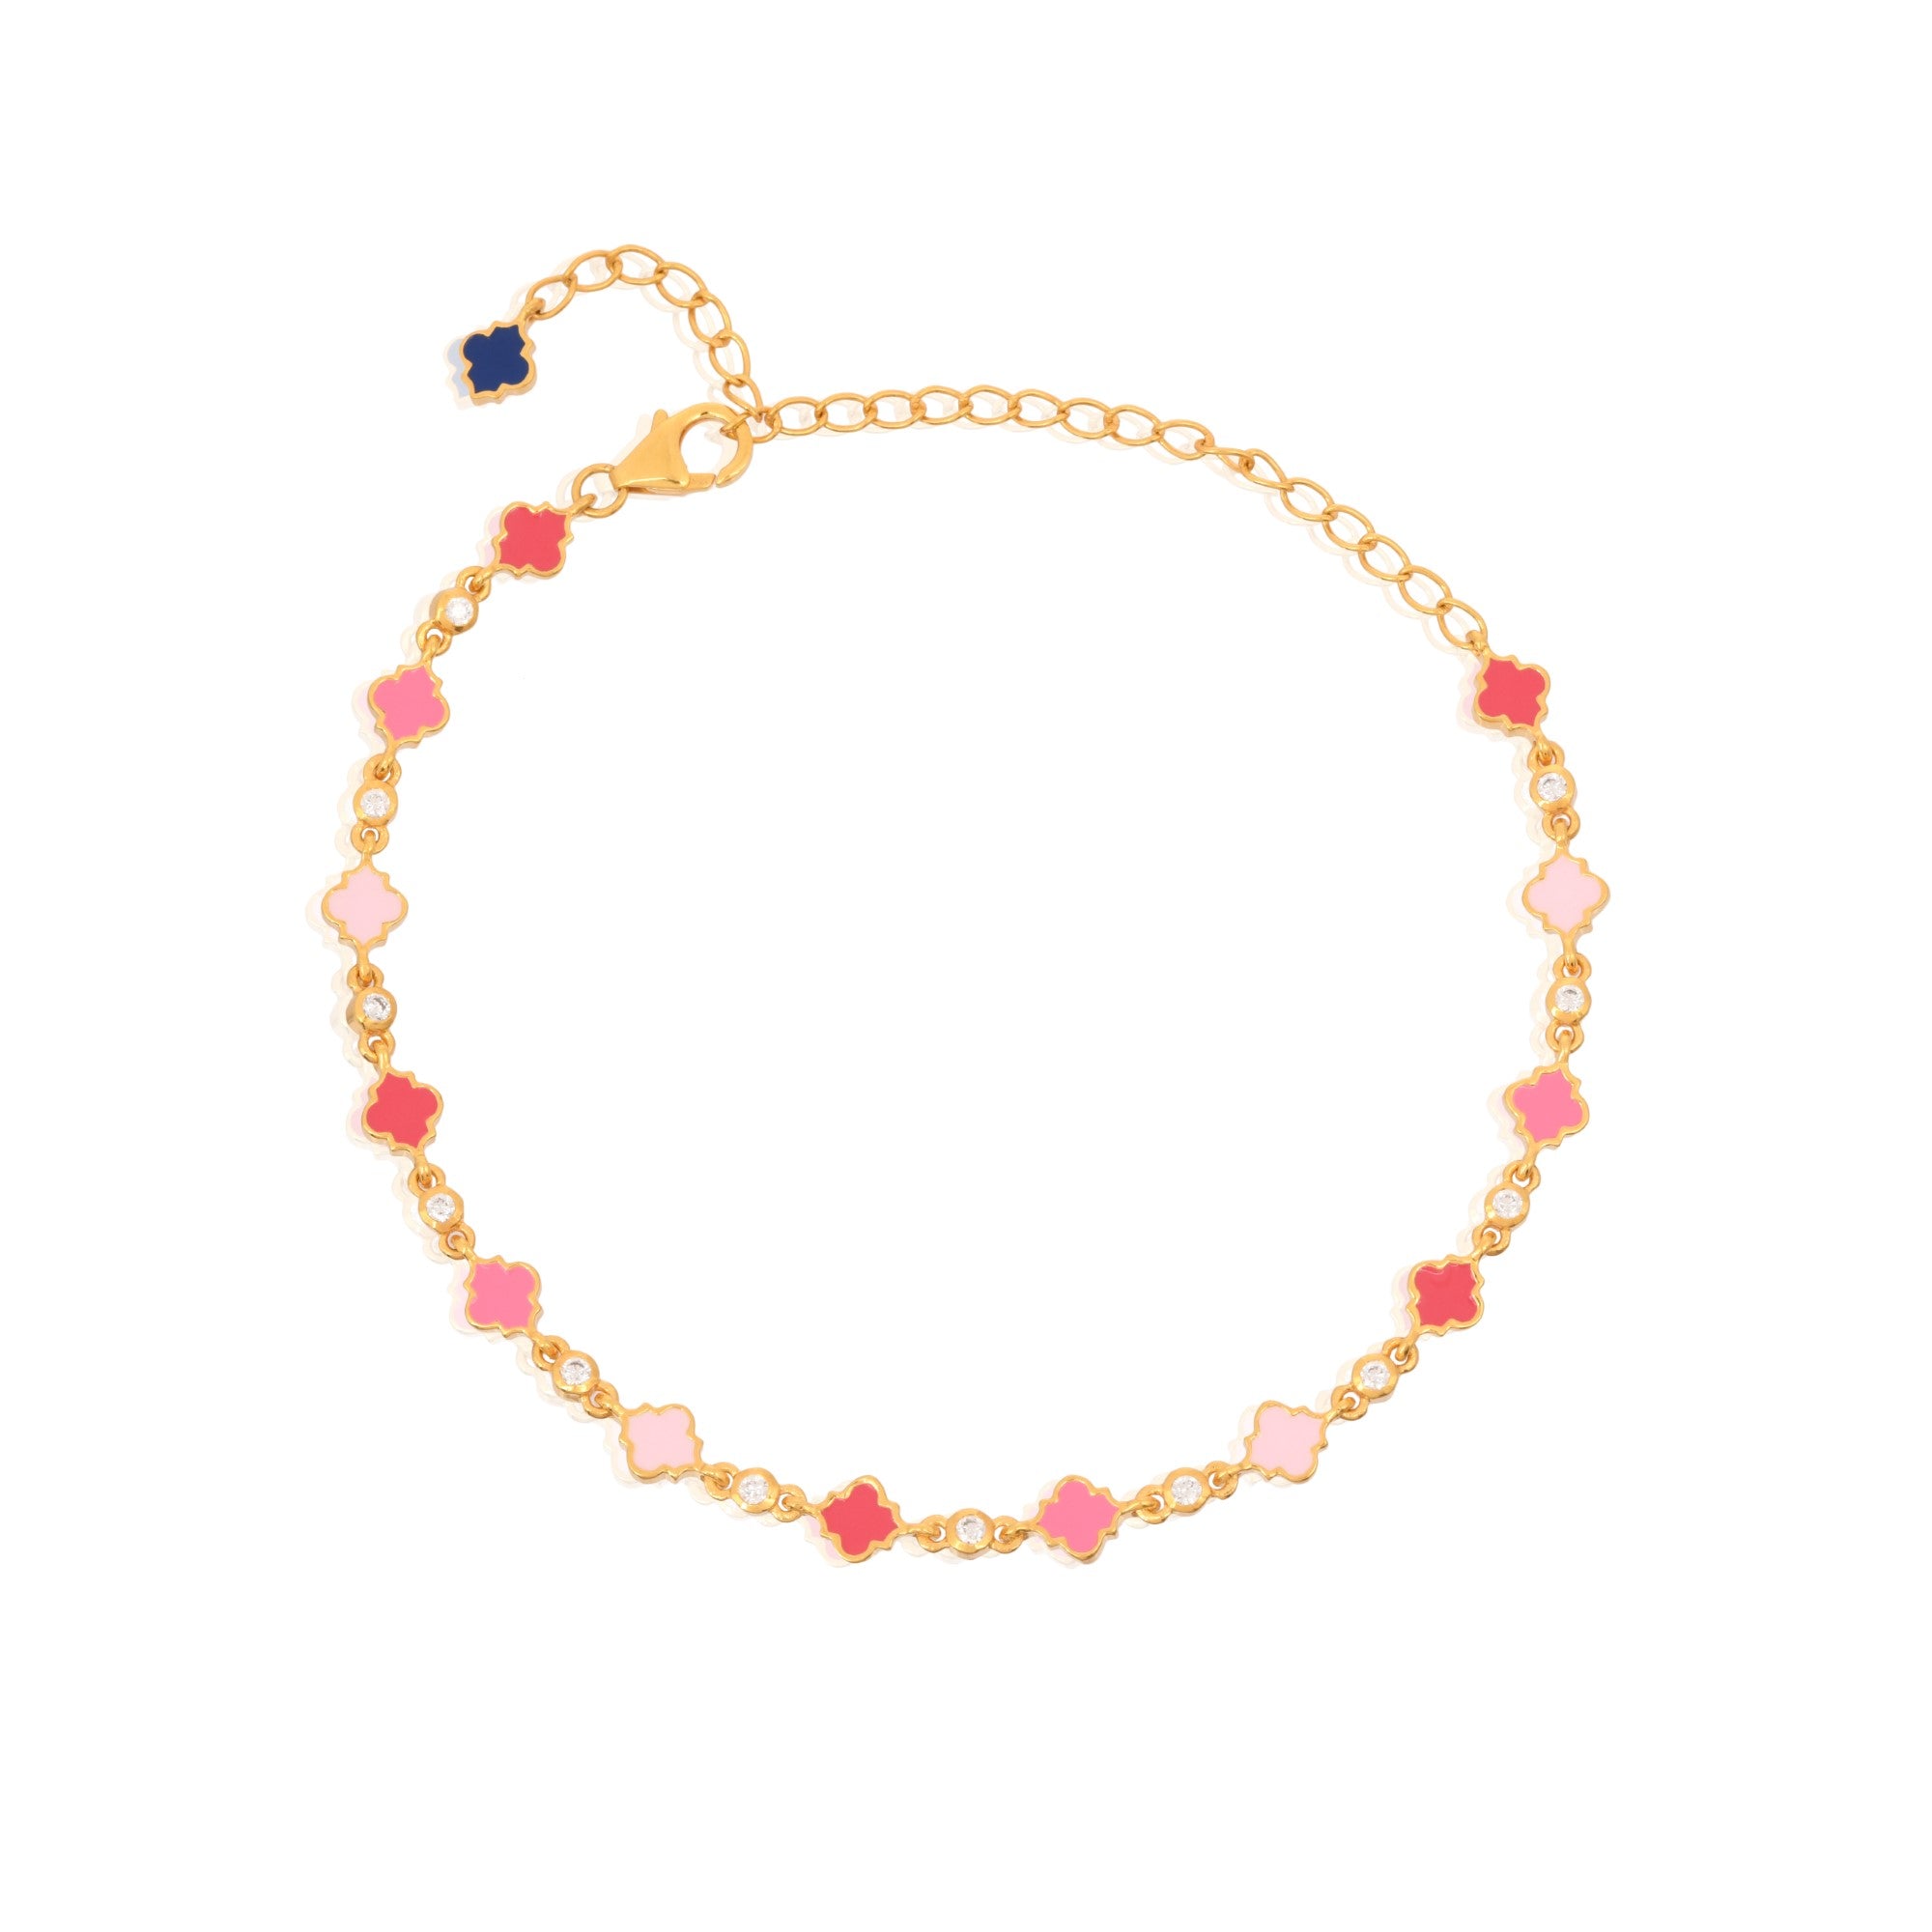 Amama,Tia Anklet (Reversible)